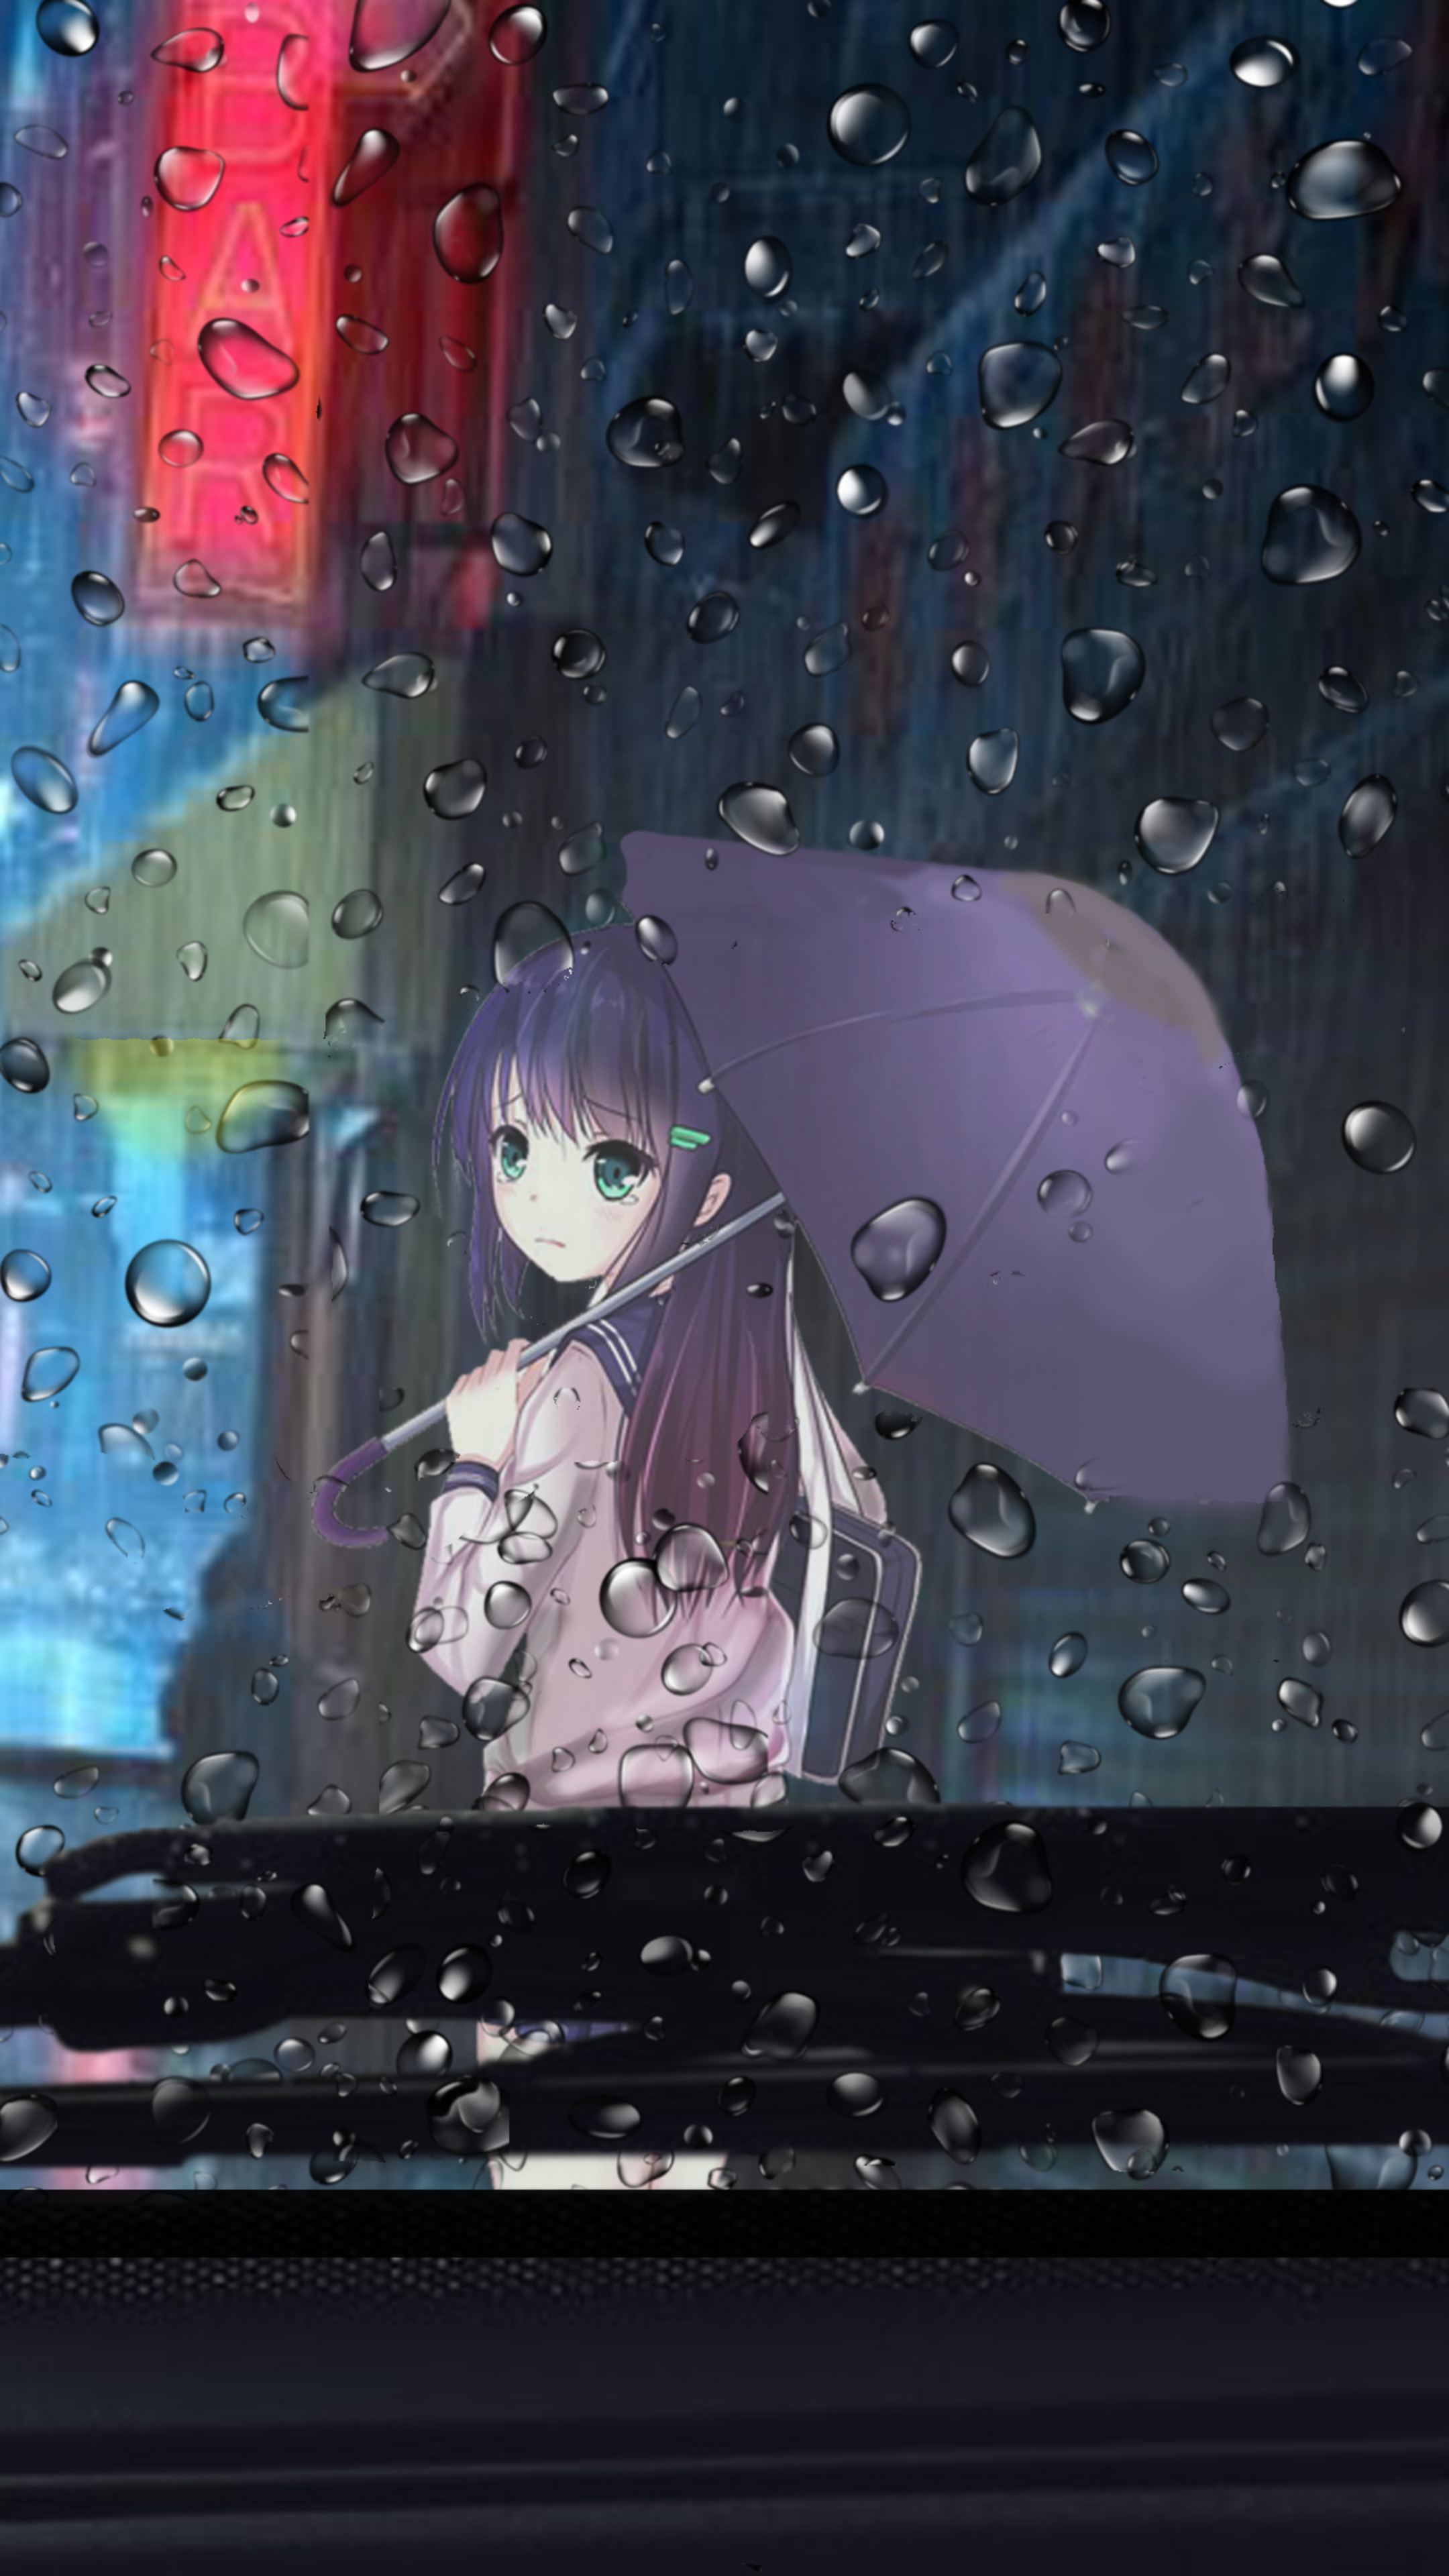 2160x3840 Anime Girl Rainy Day View From Car 4k Sony Xperia X,XZ,Z5 Premium  HD 4k Wallpapers, Images, Backgrounds, Photos and Pictures